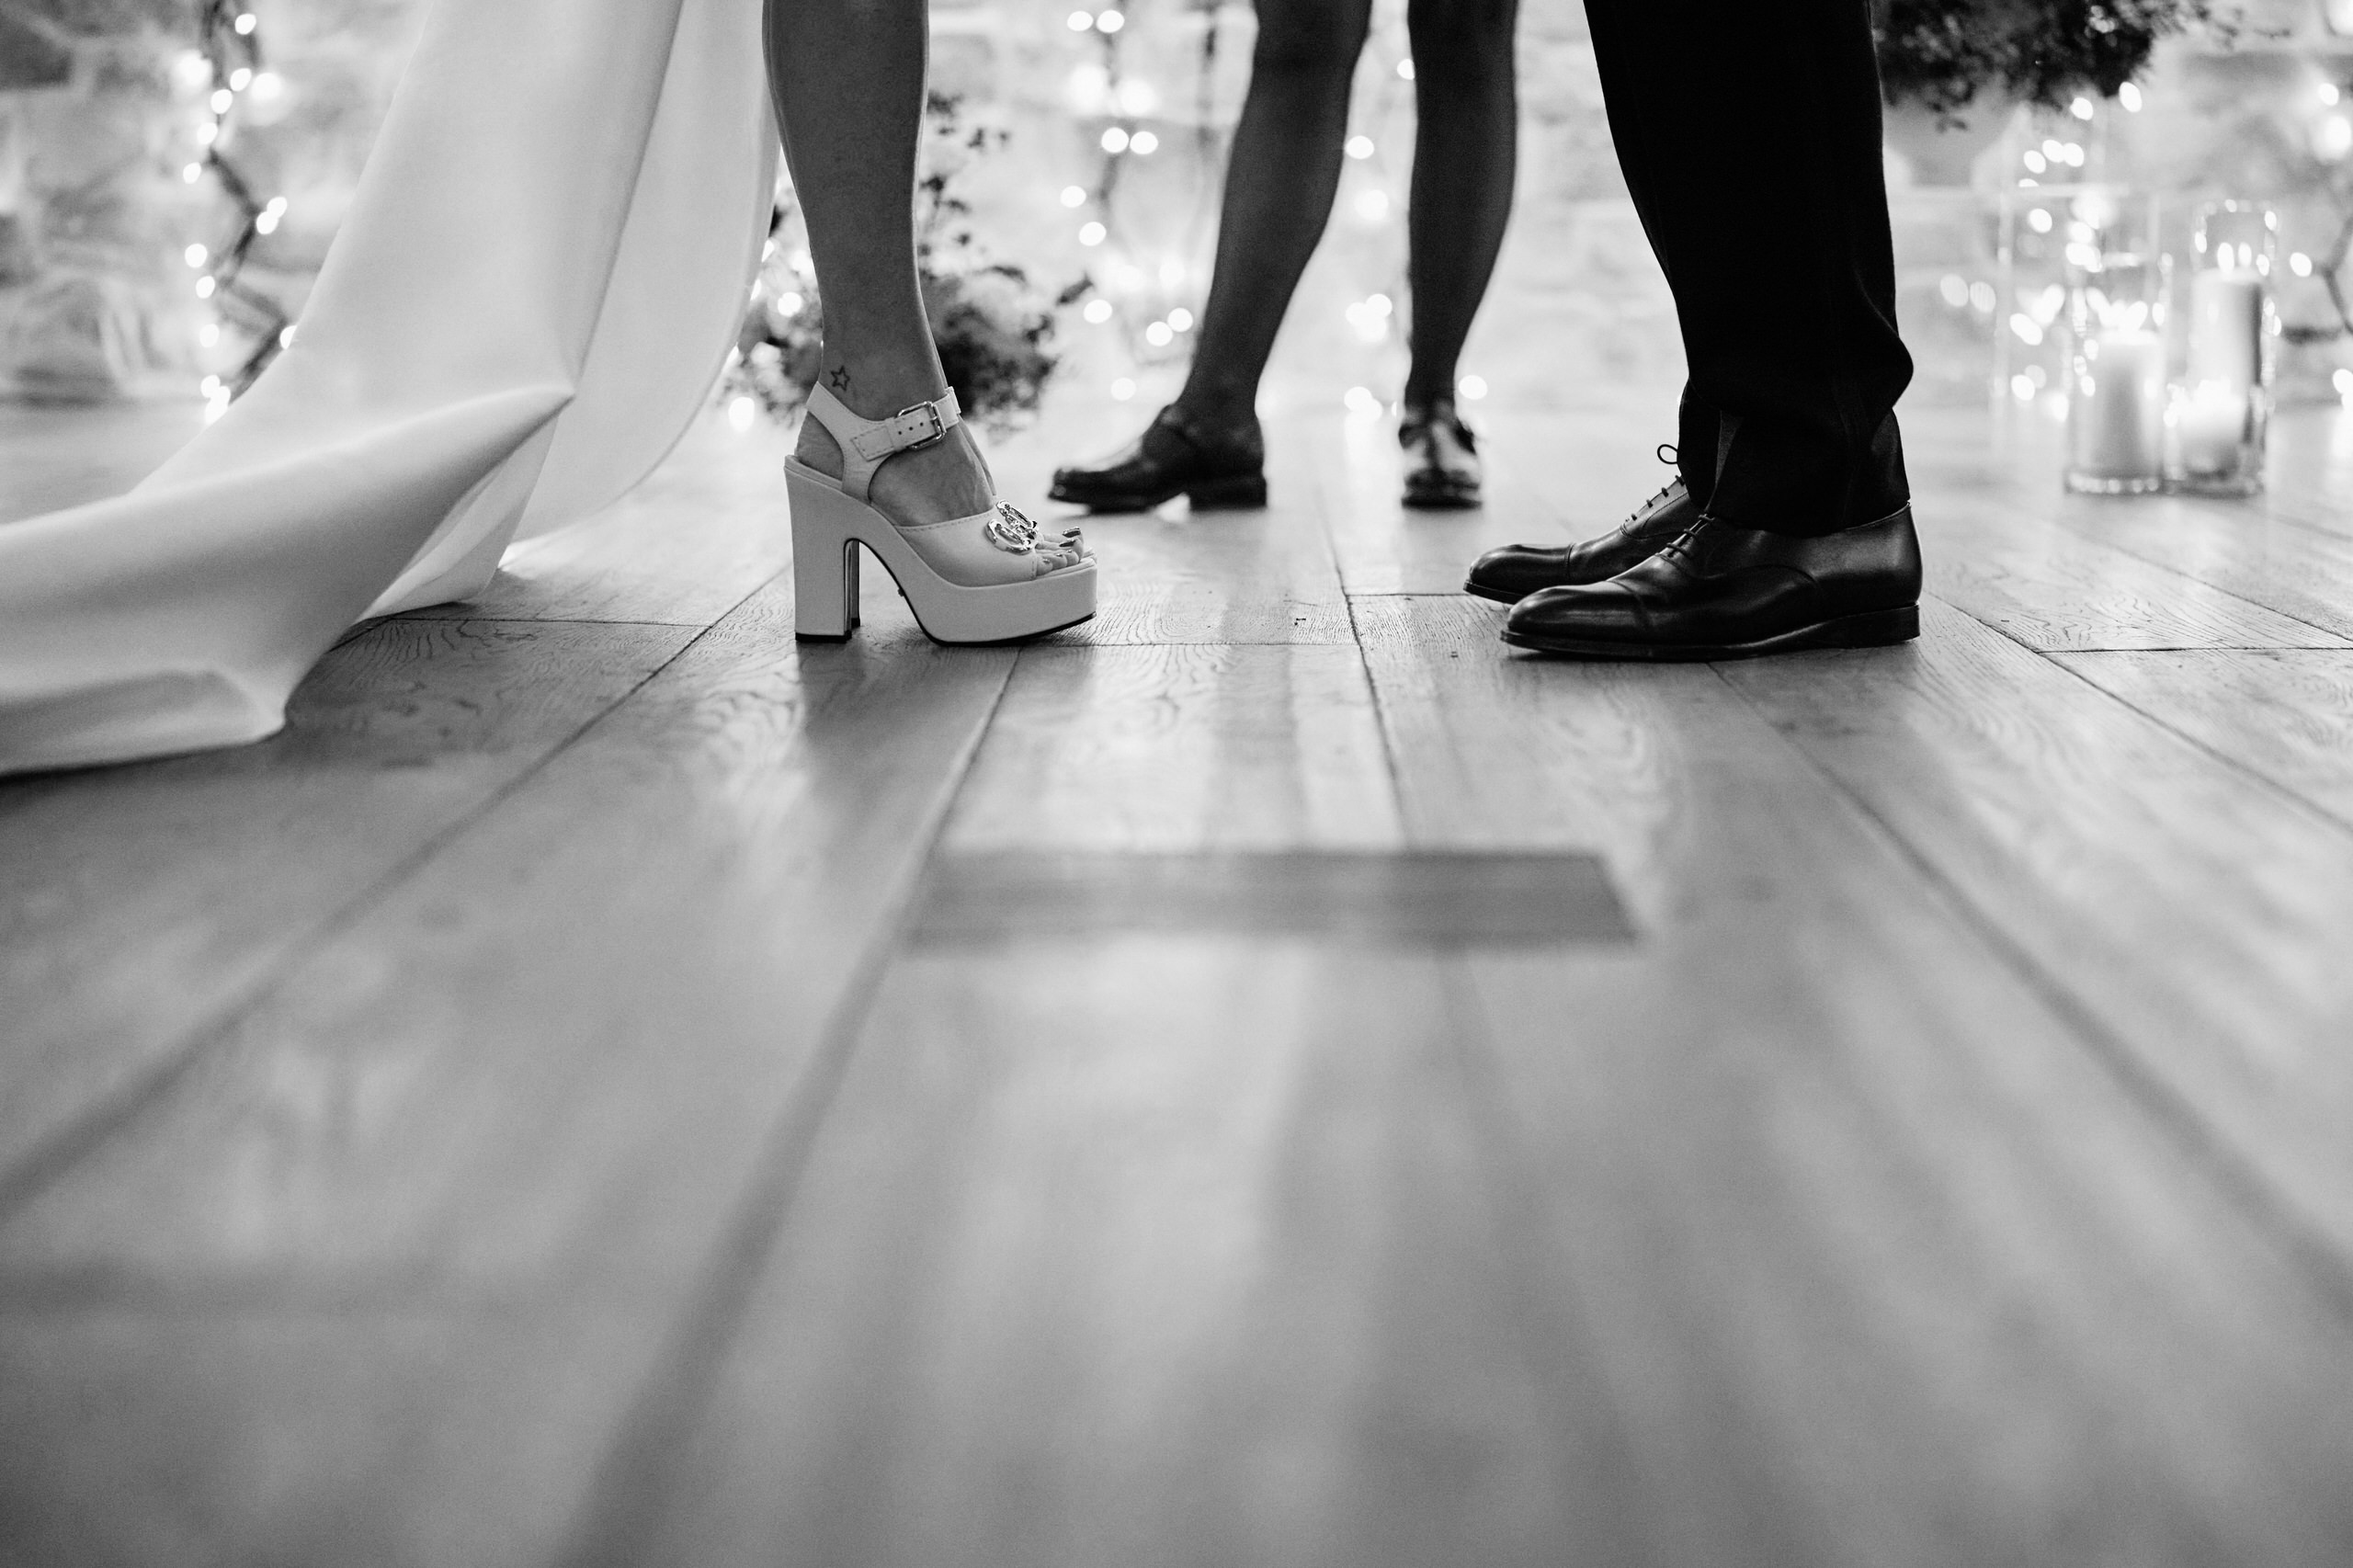 A man and woman getting married, standing on a wood floor.